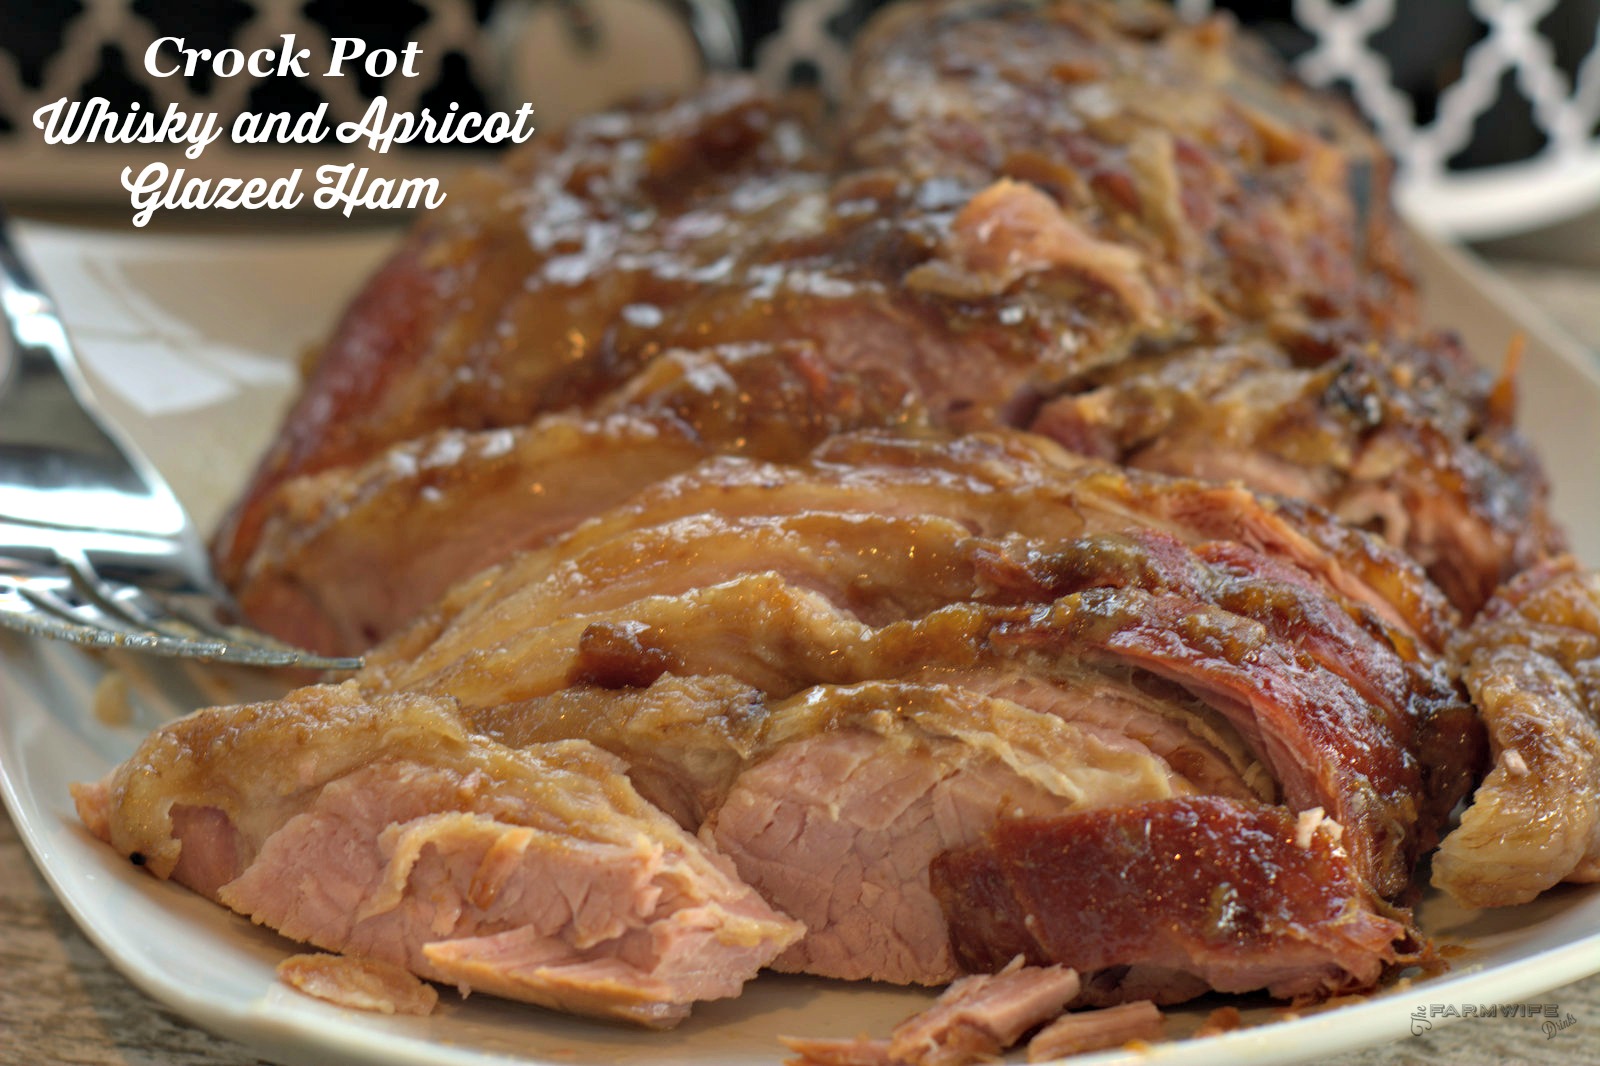 Whisky and Apricot Glazed Ham in the crock pot is a delicious ham recipe perfect for family dinners.